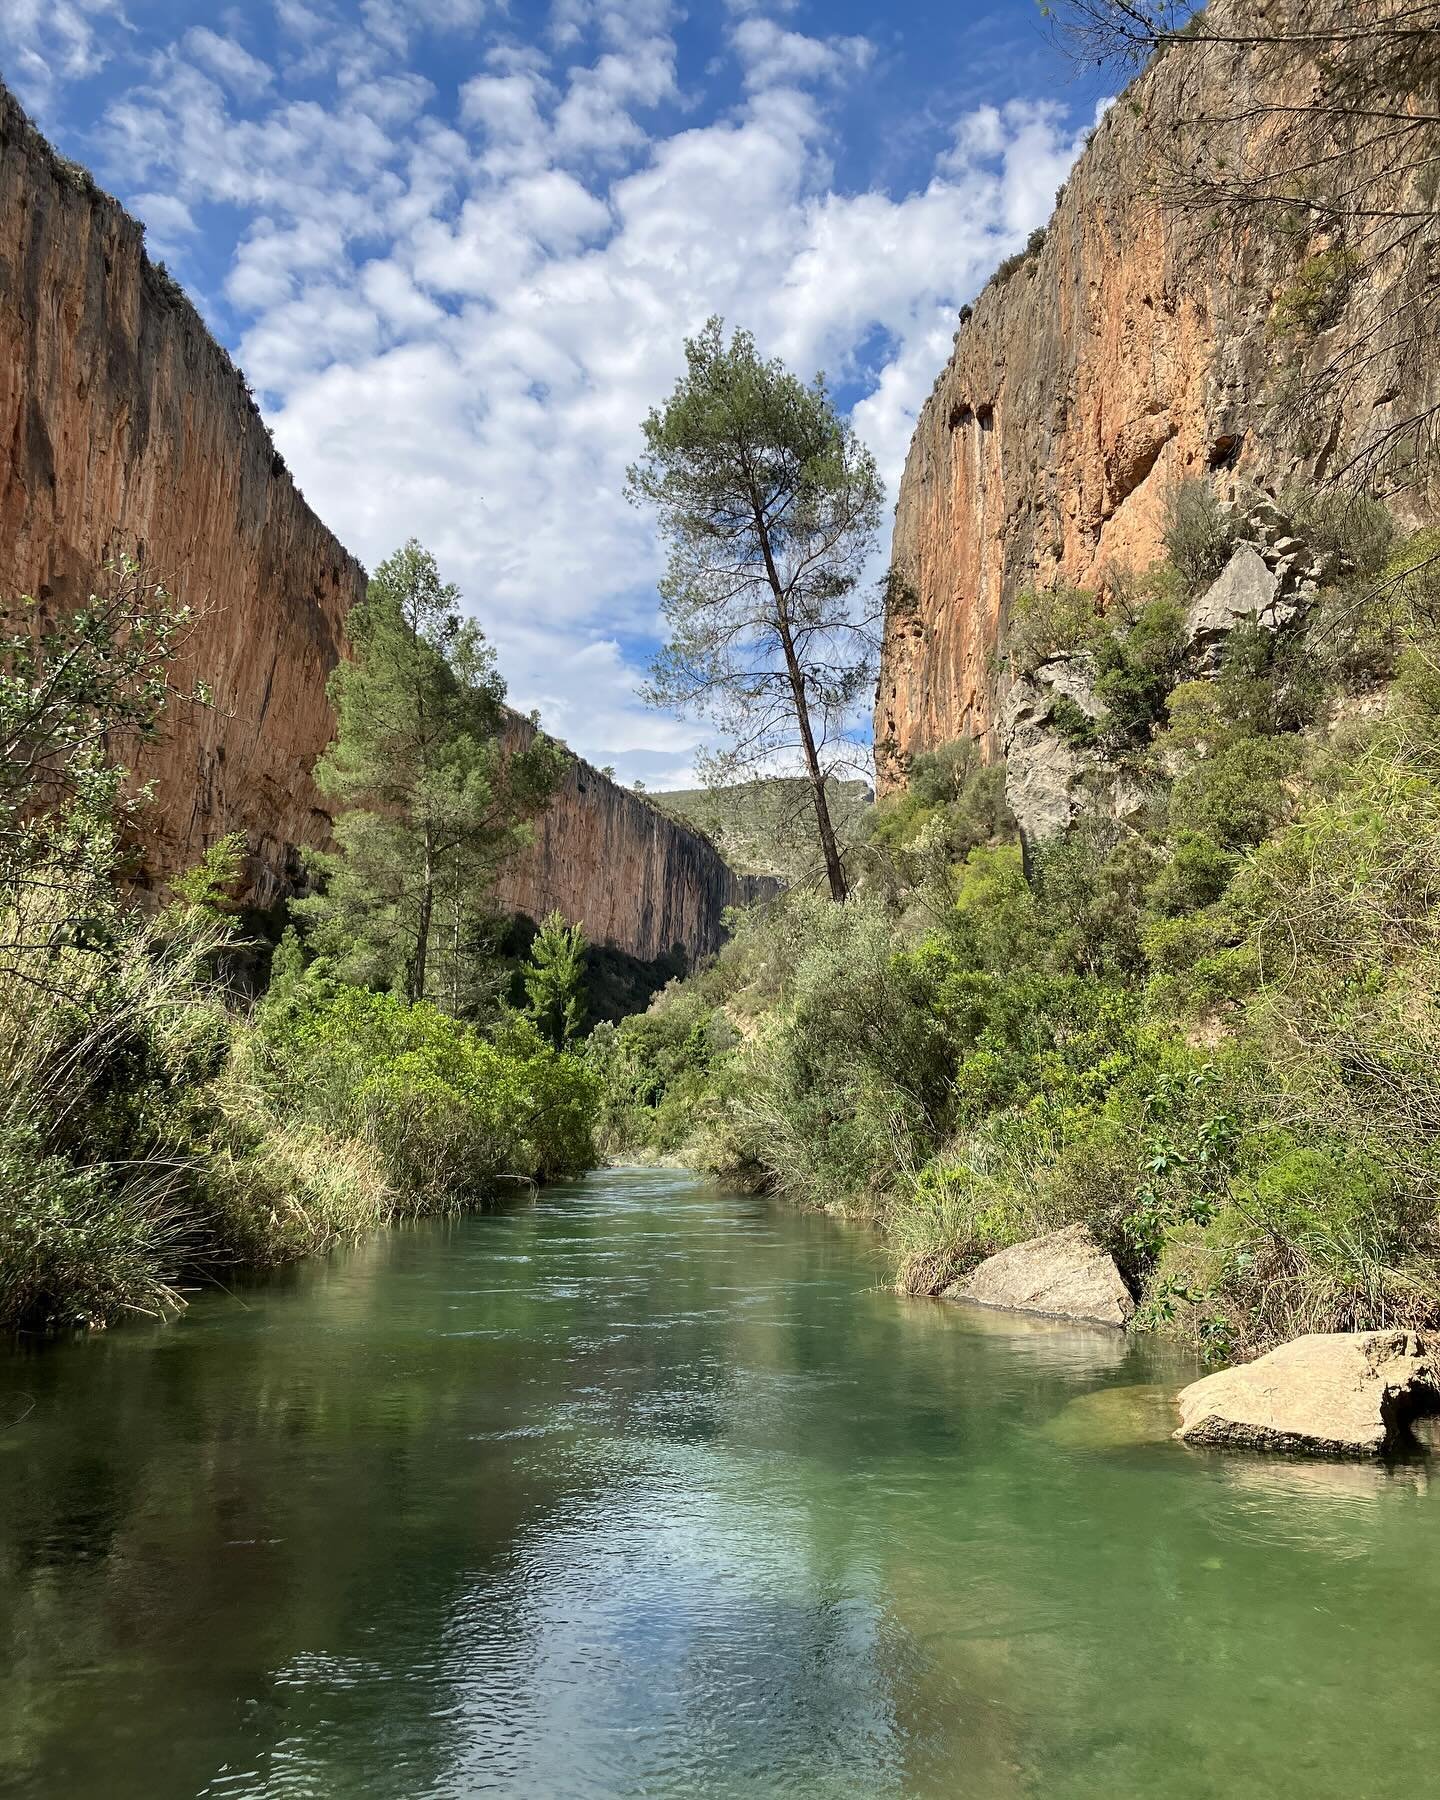 Hiking in Chulilla along the Turia river and the &ldquo;Ruta de Los Calderones&rdquo; between the steep canyon walls, suspended bridges, and drop dead vistas. Thanks @jamelly35 Jamel &amp; Mike for a great trek today. #chulilla #expatlife